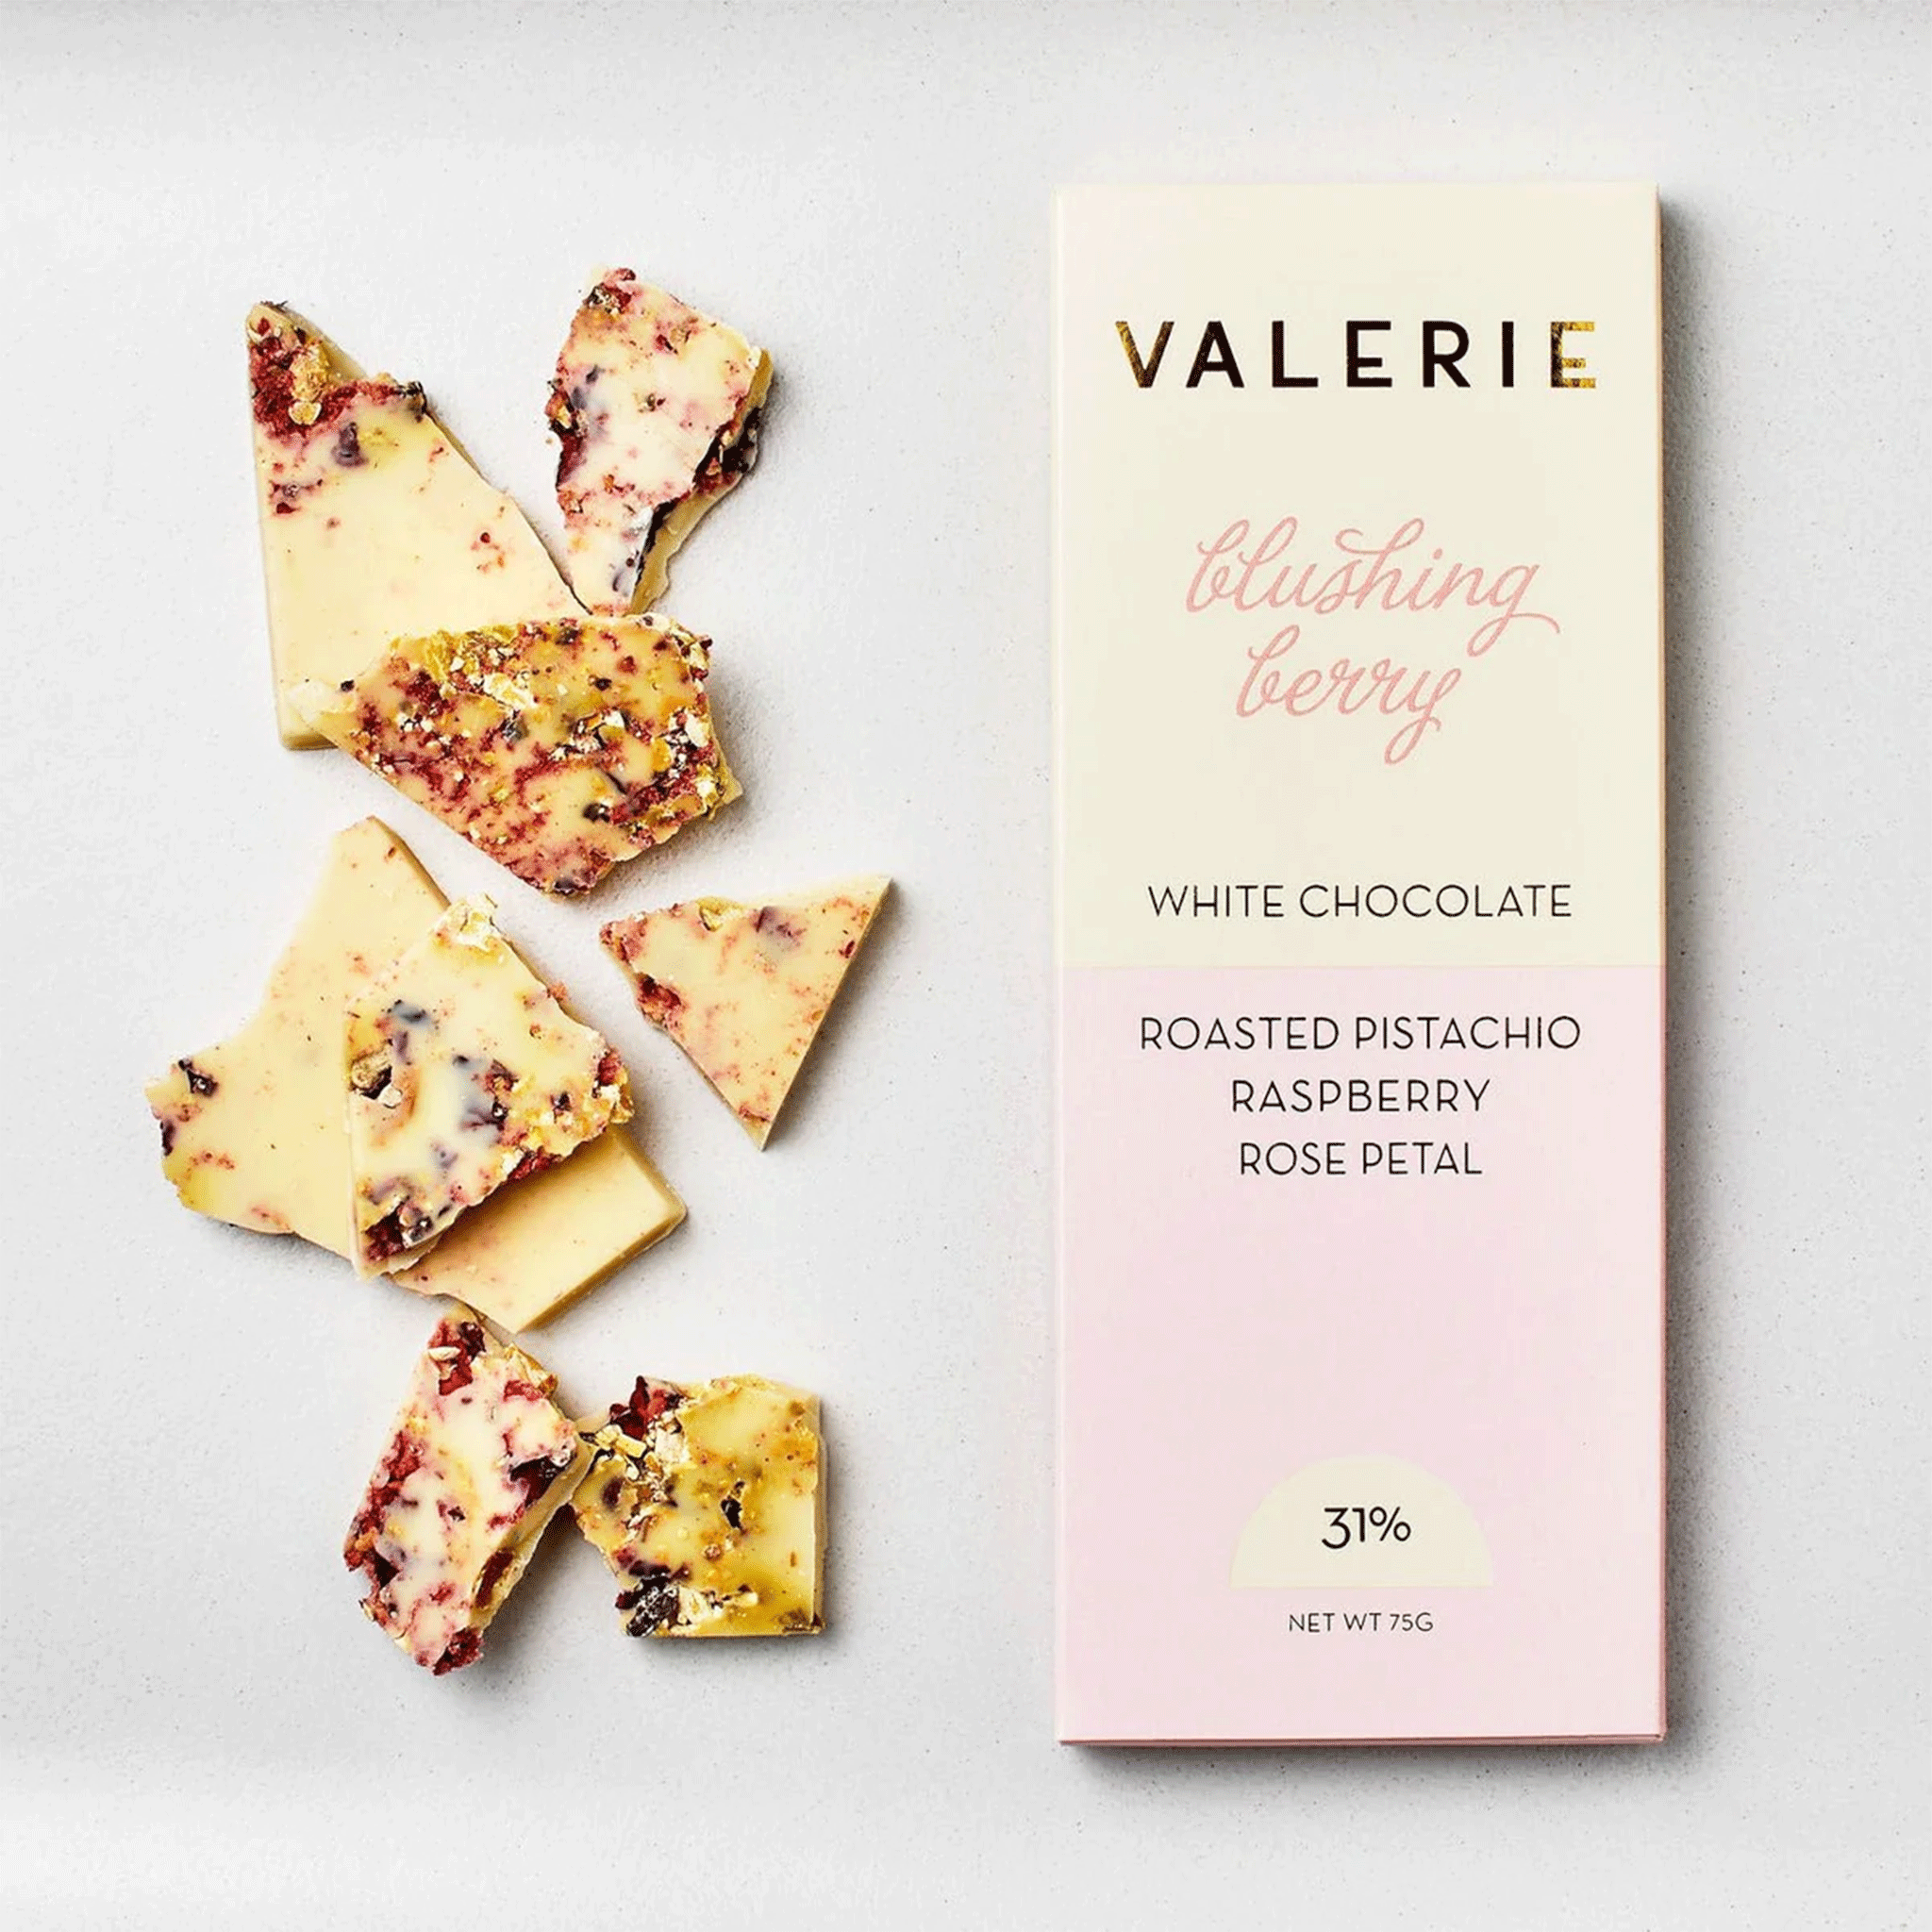 On a white background is a light pink and ivory packaged white chocolate bar that reads, &quot;Valerie blushing berry White Chocolate Roasted Pistachio, Raspberry, Rose Petal&quot;. 